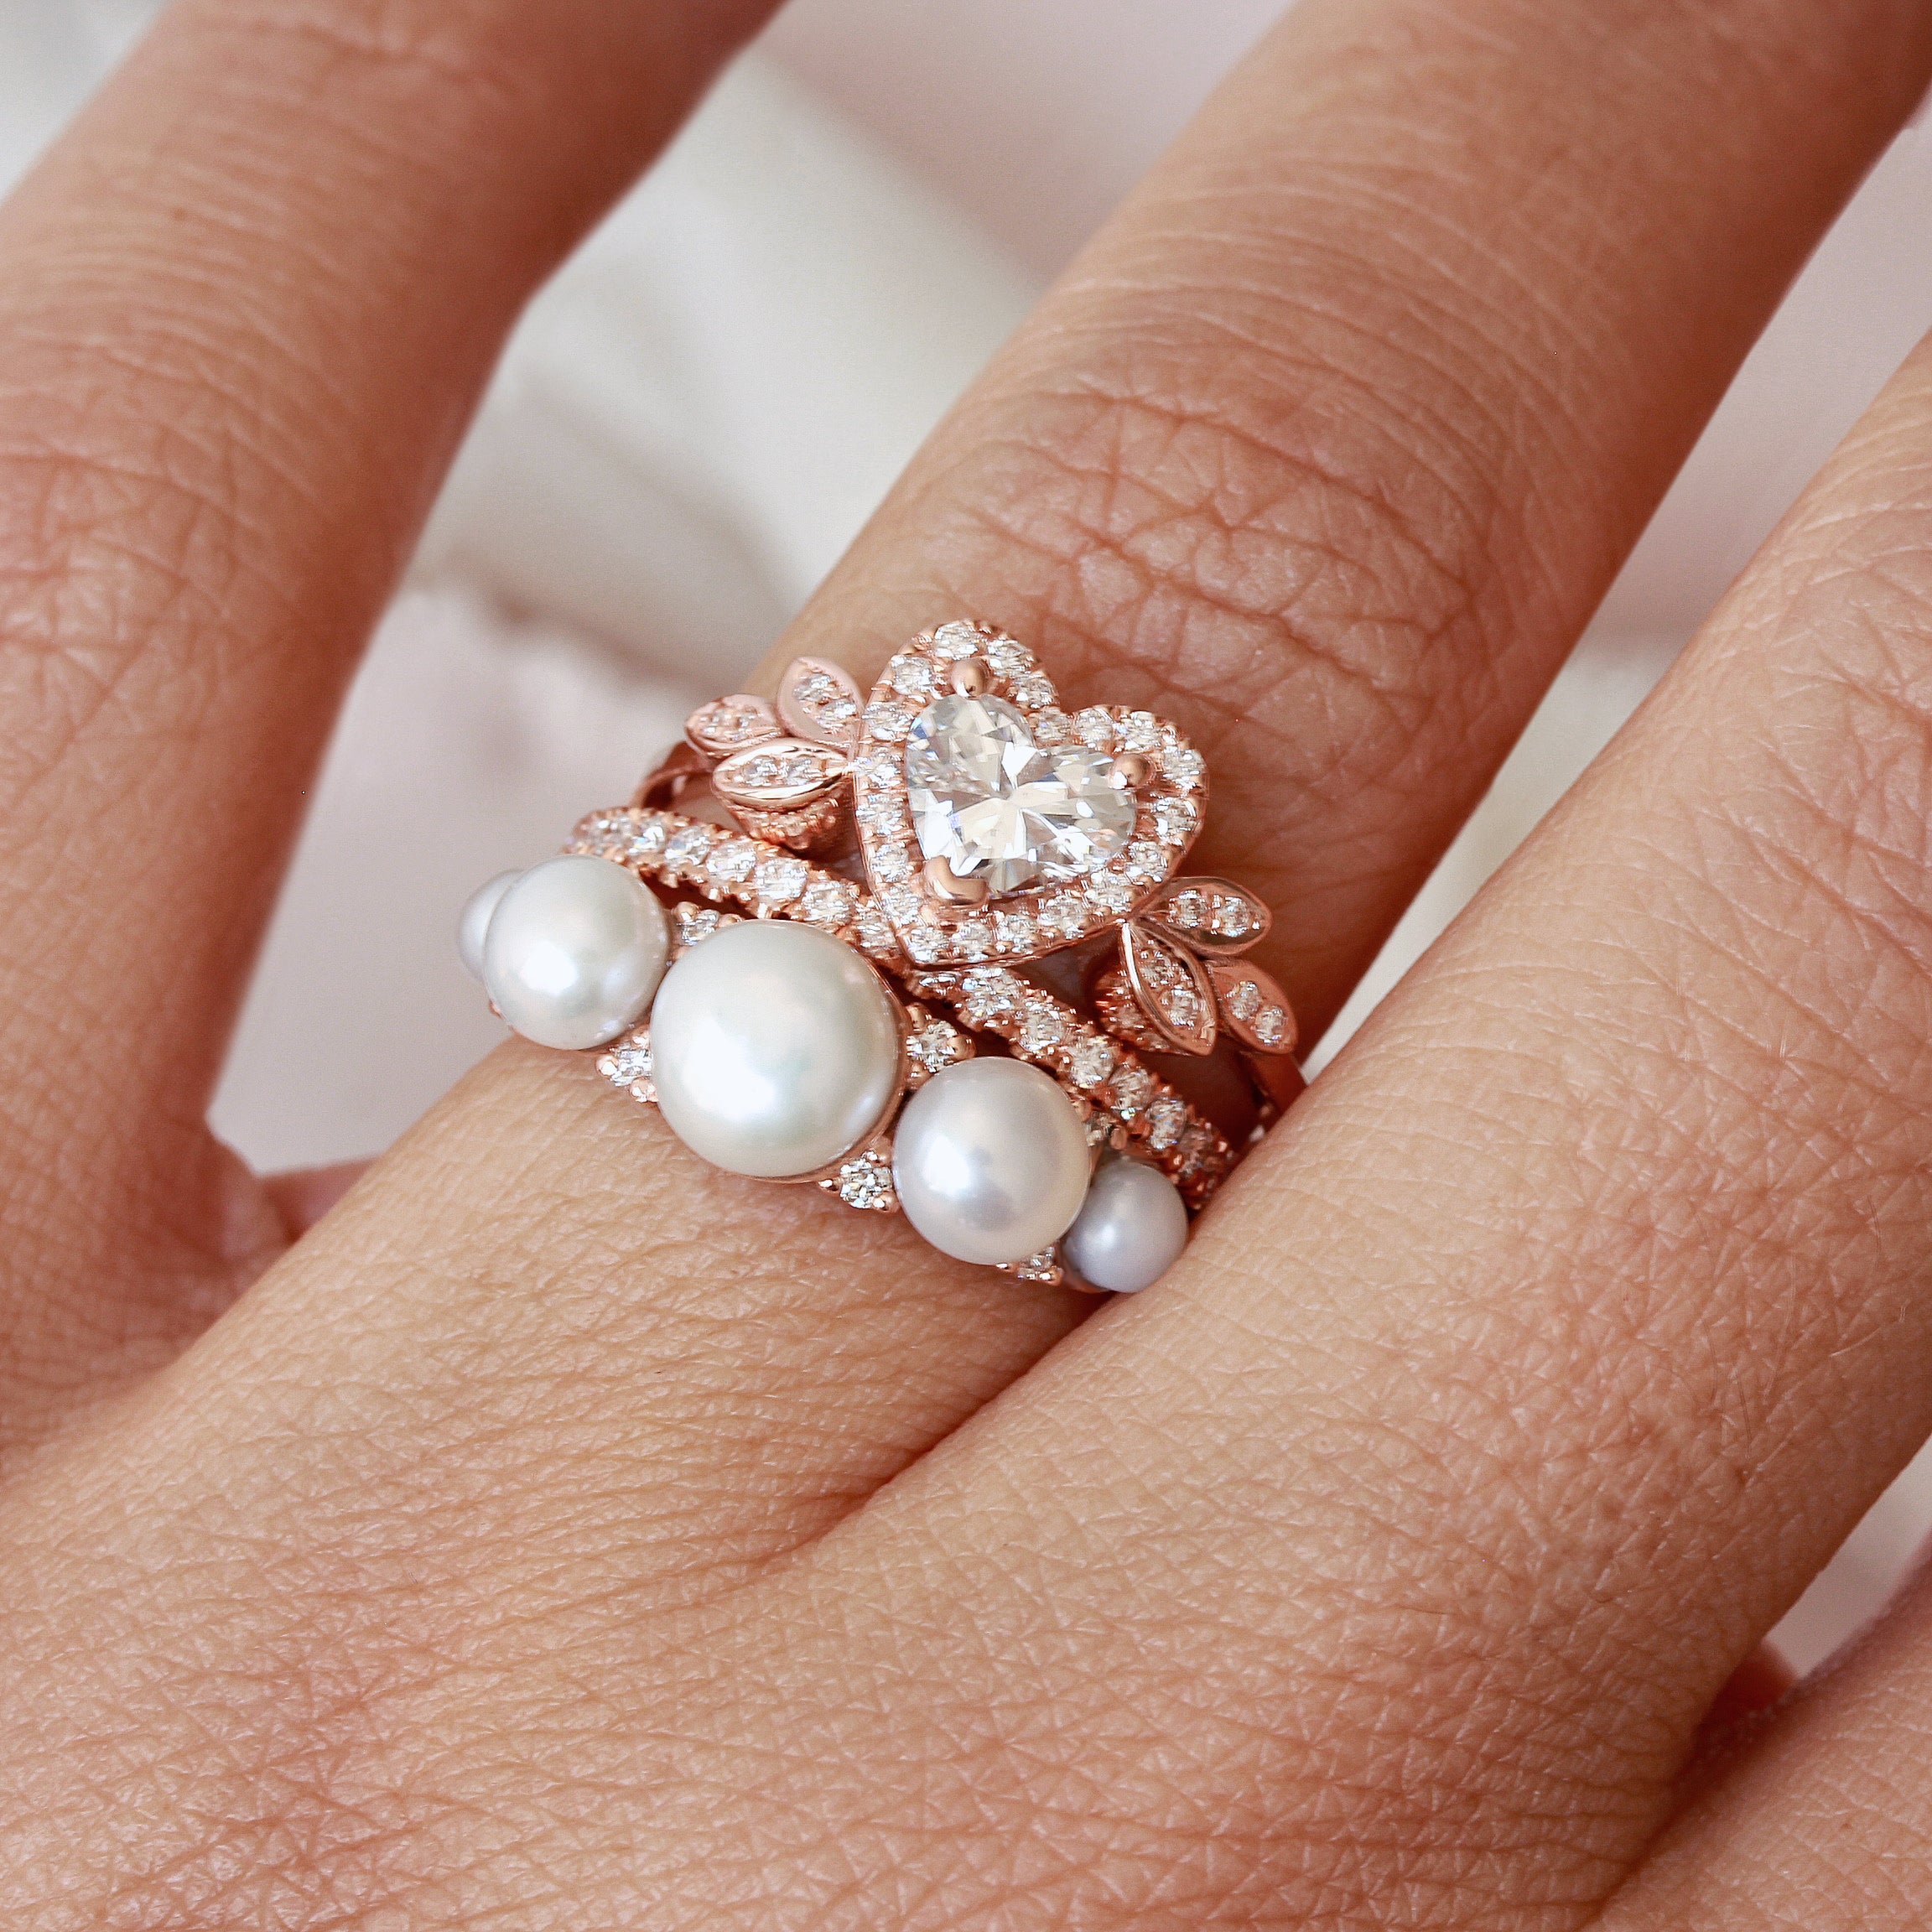 Pearls and Diamonds Vintage Inspired Ring - Lia